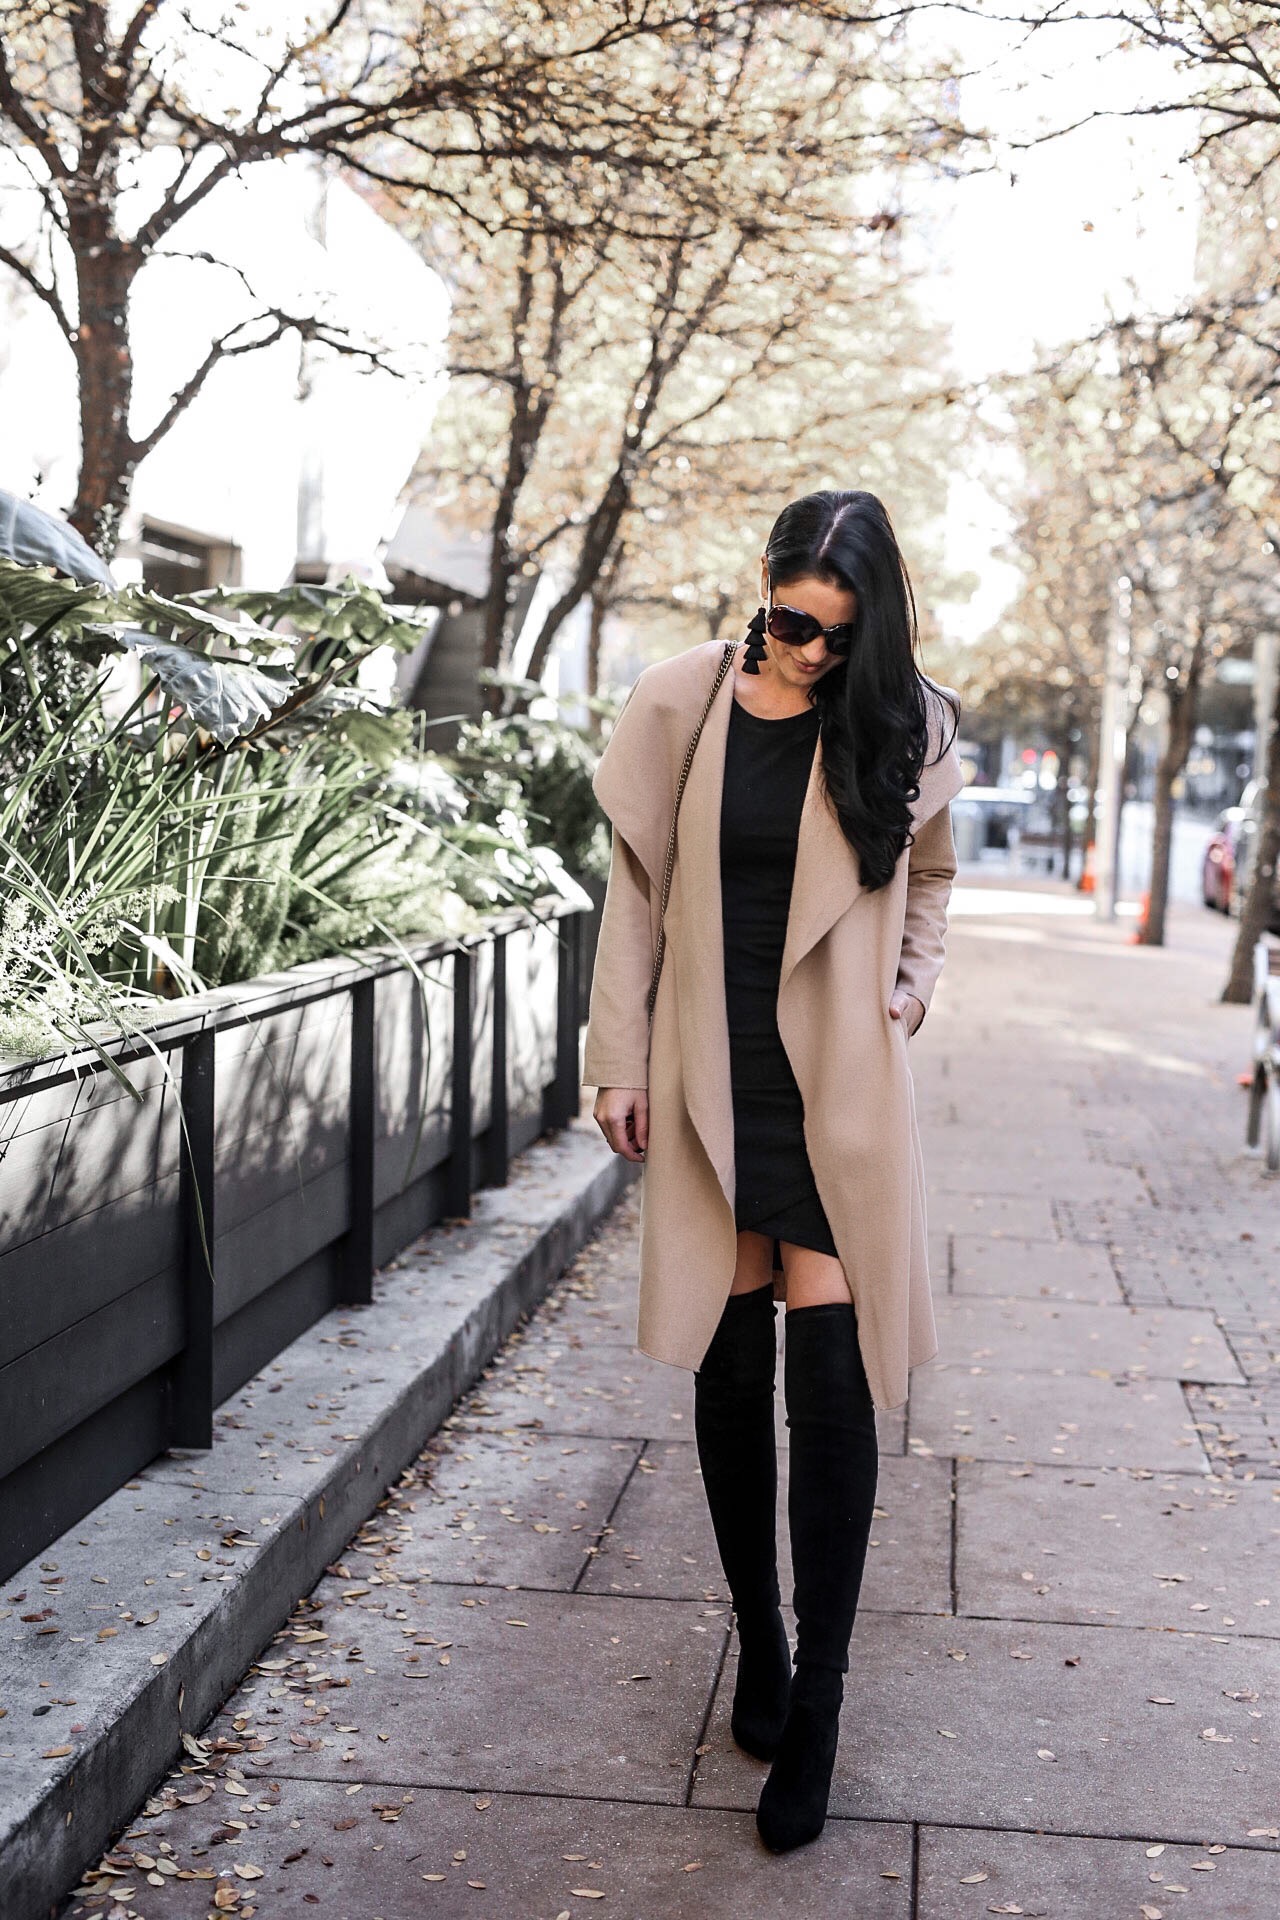 DTKAustin shares her top affordable coats from Chicwish that are under $100. Handbag from Henri Bendel, OTK boots from Goodnight Macaroon. | winter coats for women | how to style winter coats | affordable winter coats | winter style tips | winter fashion tips || Dressed to Kill #wintercoats #affordablewinterfashion #winterfashion -  10 Must-Have Classic Affordable Coats for Winter by Austin fashion blogger Dressed to Kill